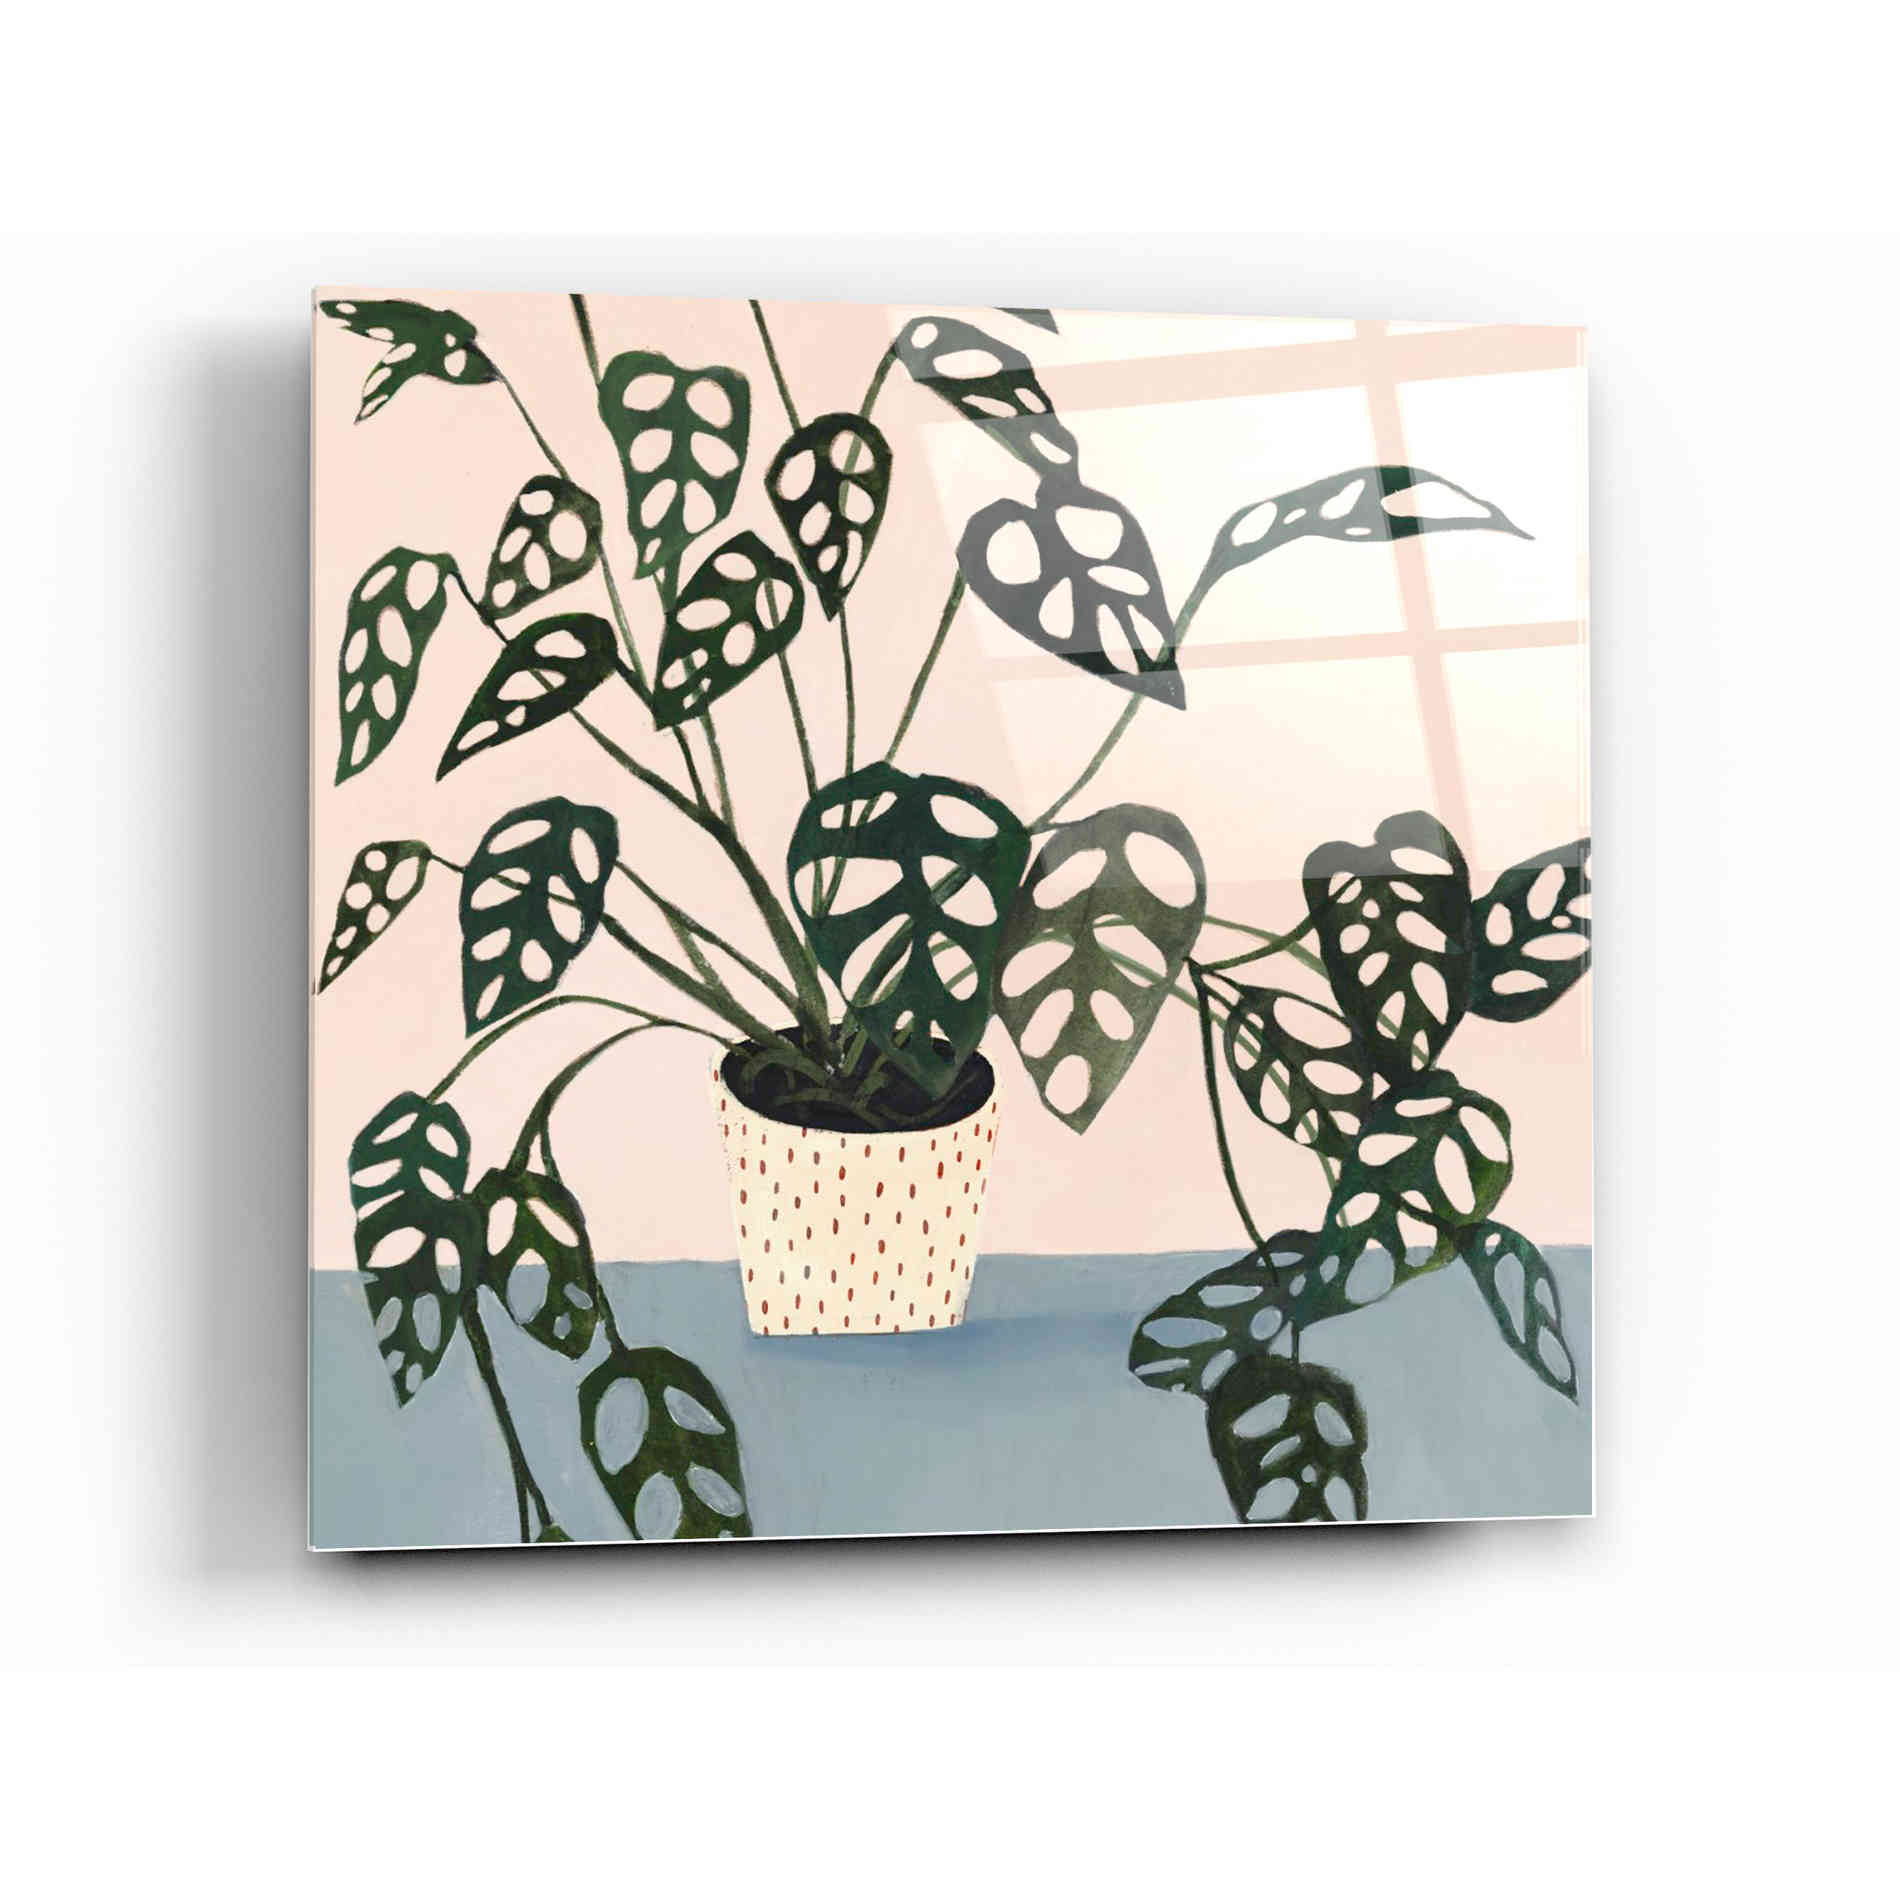 Epic Art 'Houseplant I' by Victoria Borges Acrylic Glass Wall Art,12x12